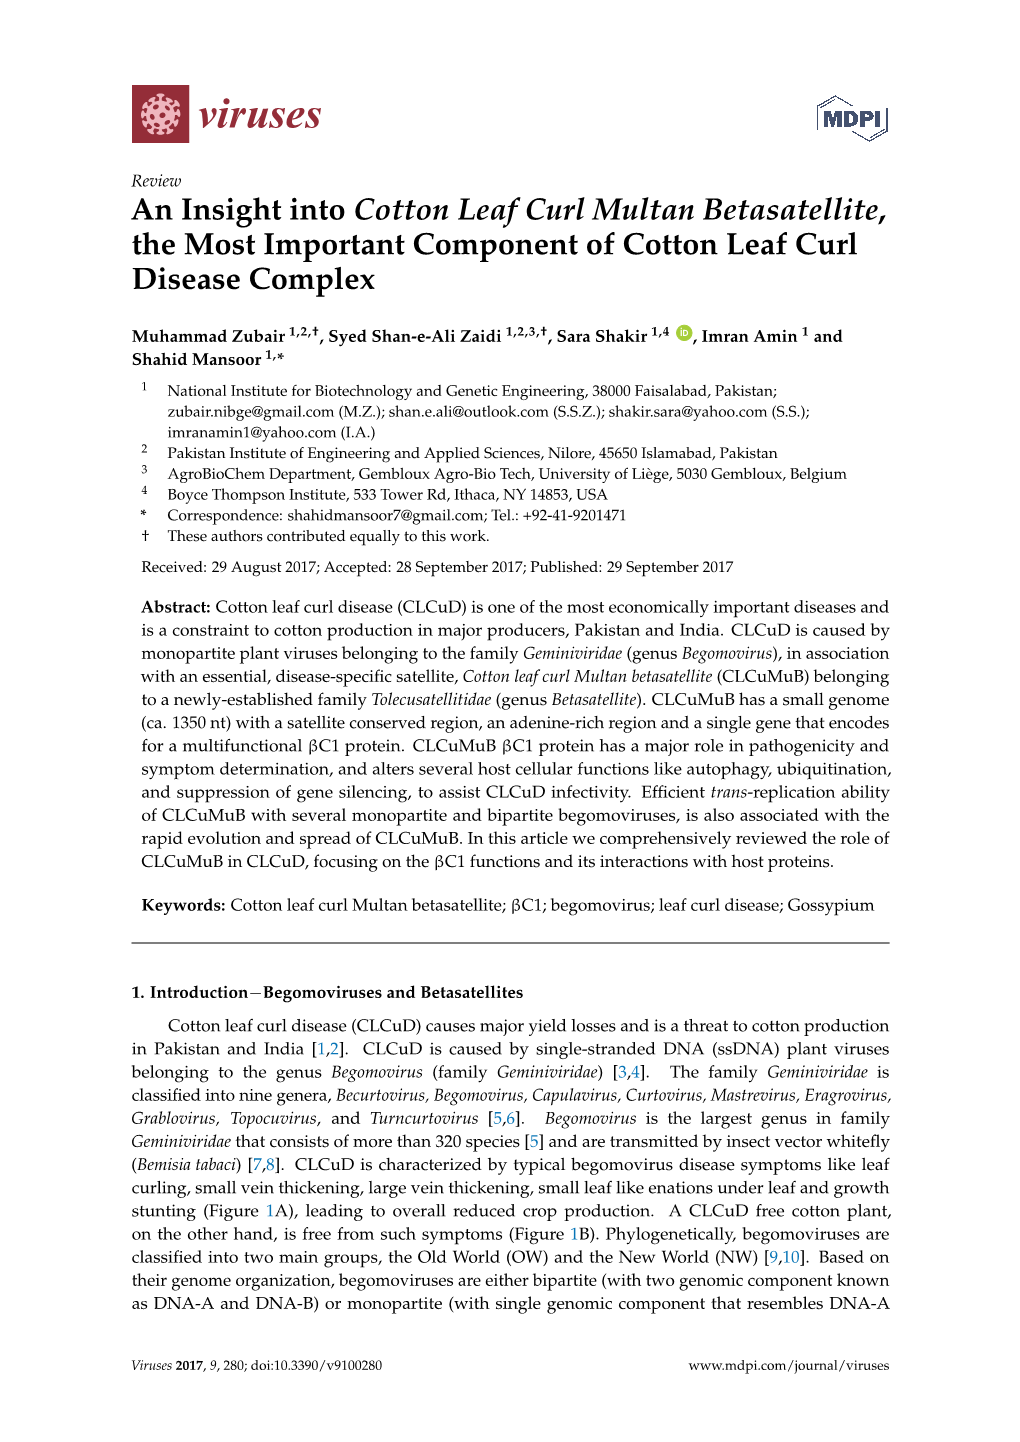 An Insight Into Cotton Leaf Curl Multan Betasatellite, the Most Important Component of Cotton Leaf Curl Disease Complex